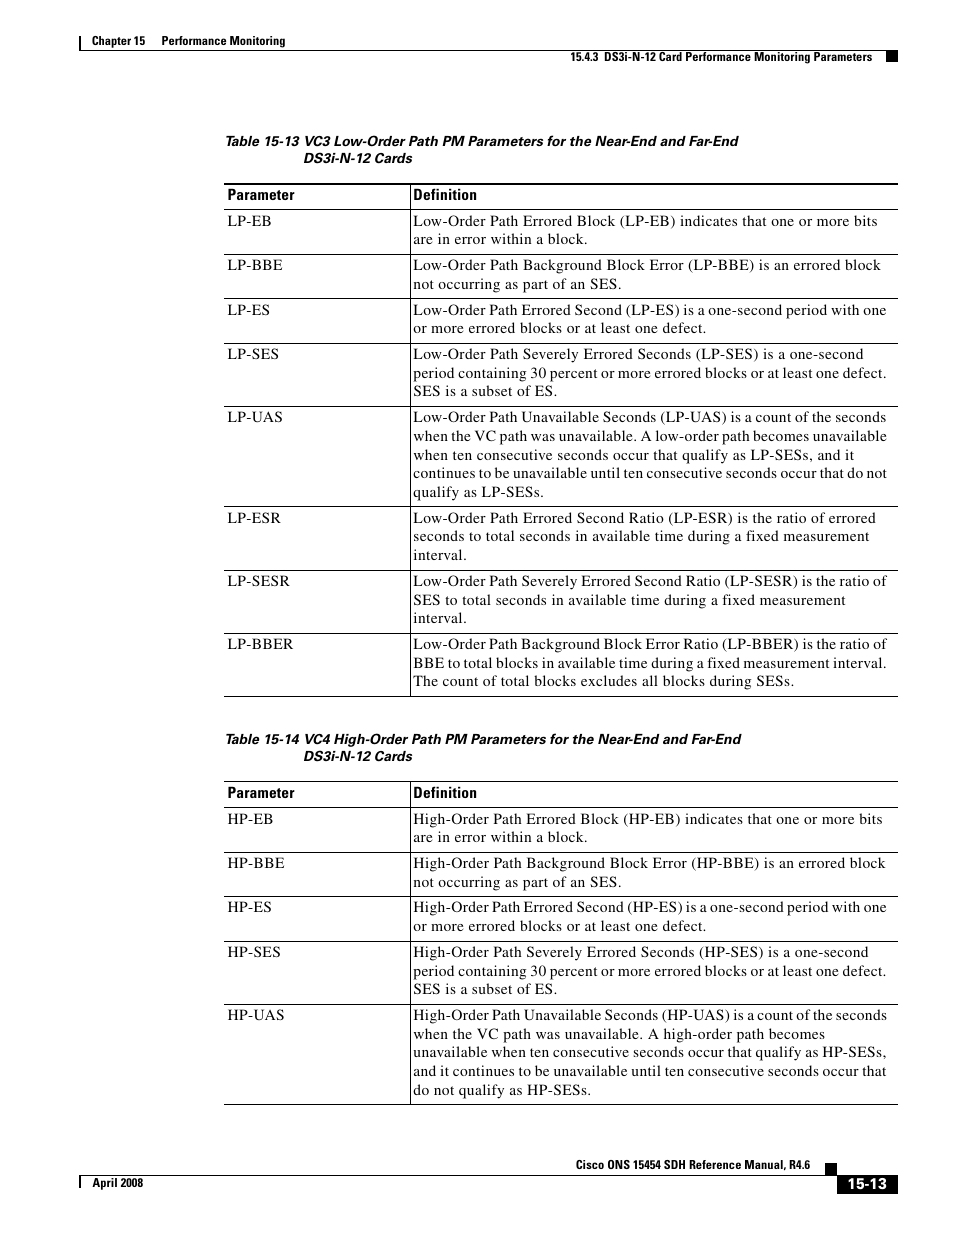 Table 15-14 on | Cisco ONS 15454 SDH User Manual | Page 13 / 62